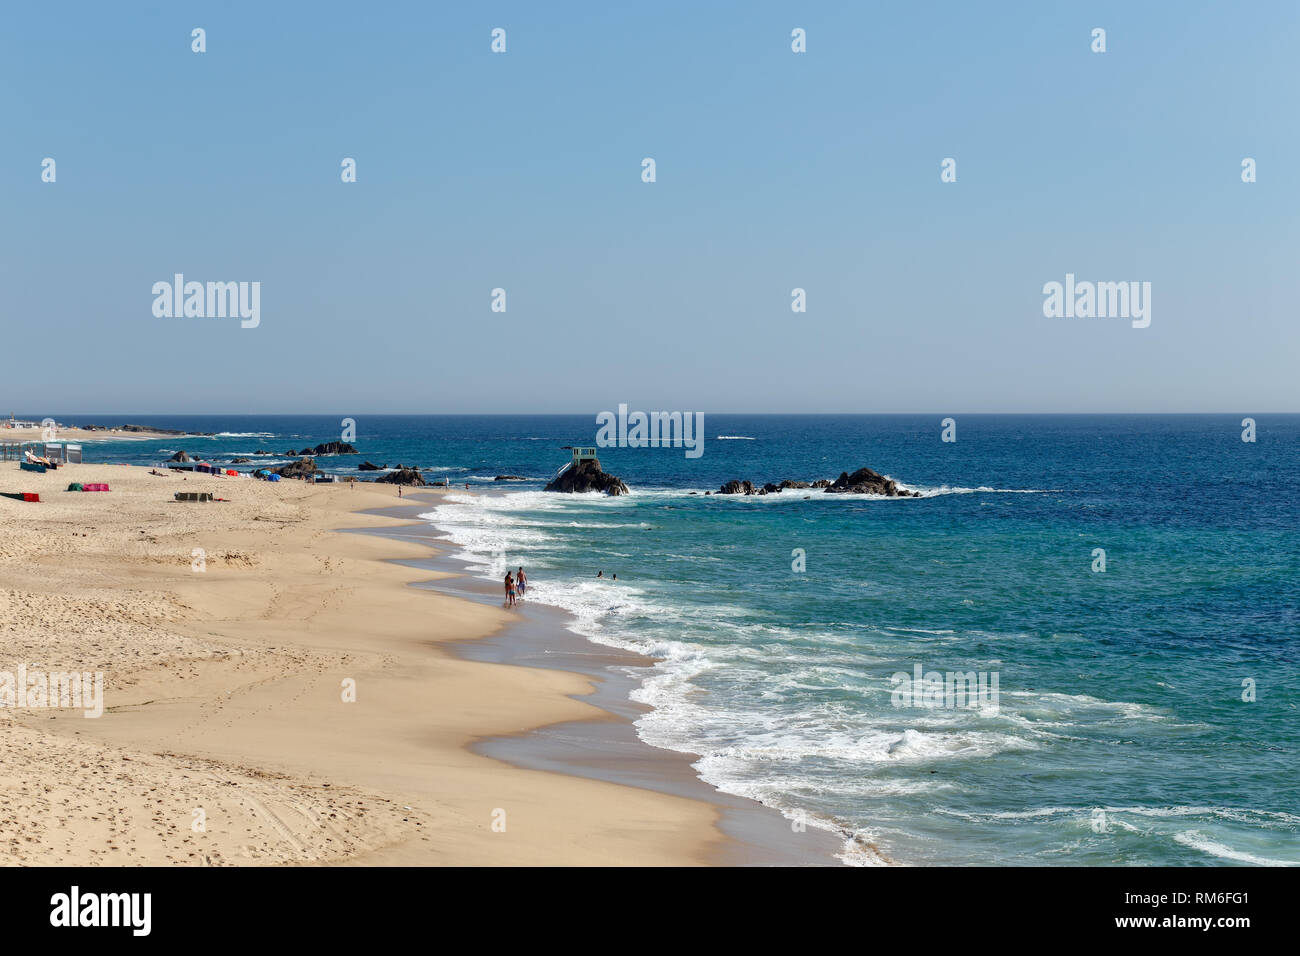 Vila do Conde, Portugal - June 19, 2015: Wide view of Vila do Conde Beach at the start of the bathing season, north of Portugal Stock Photo